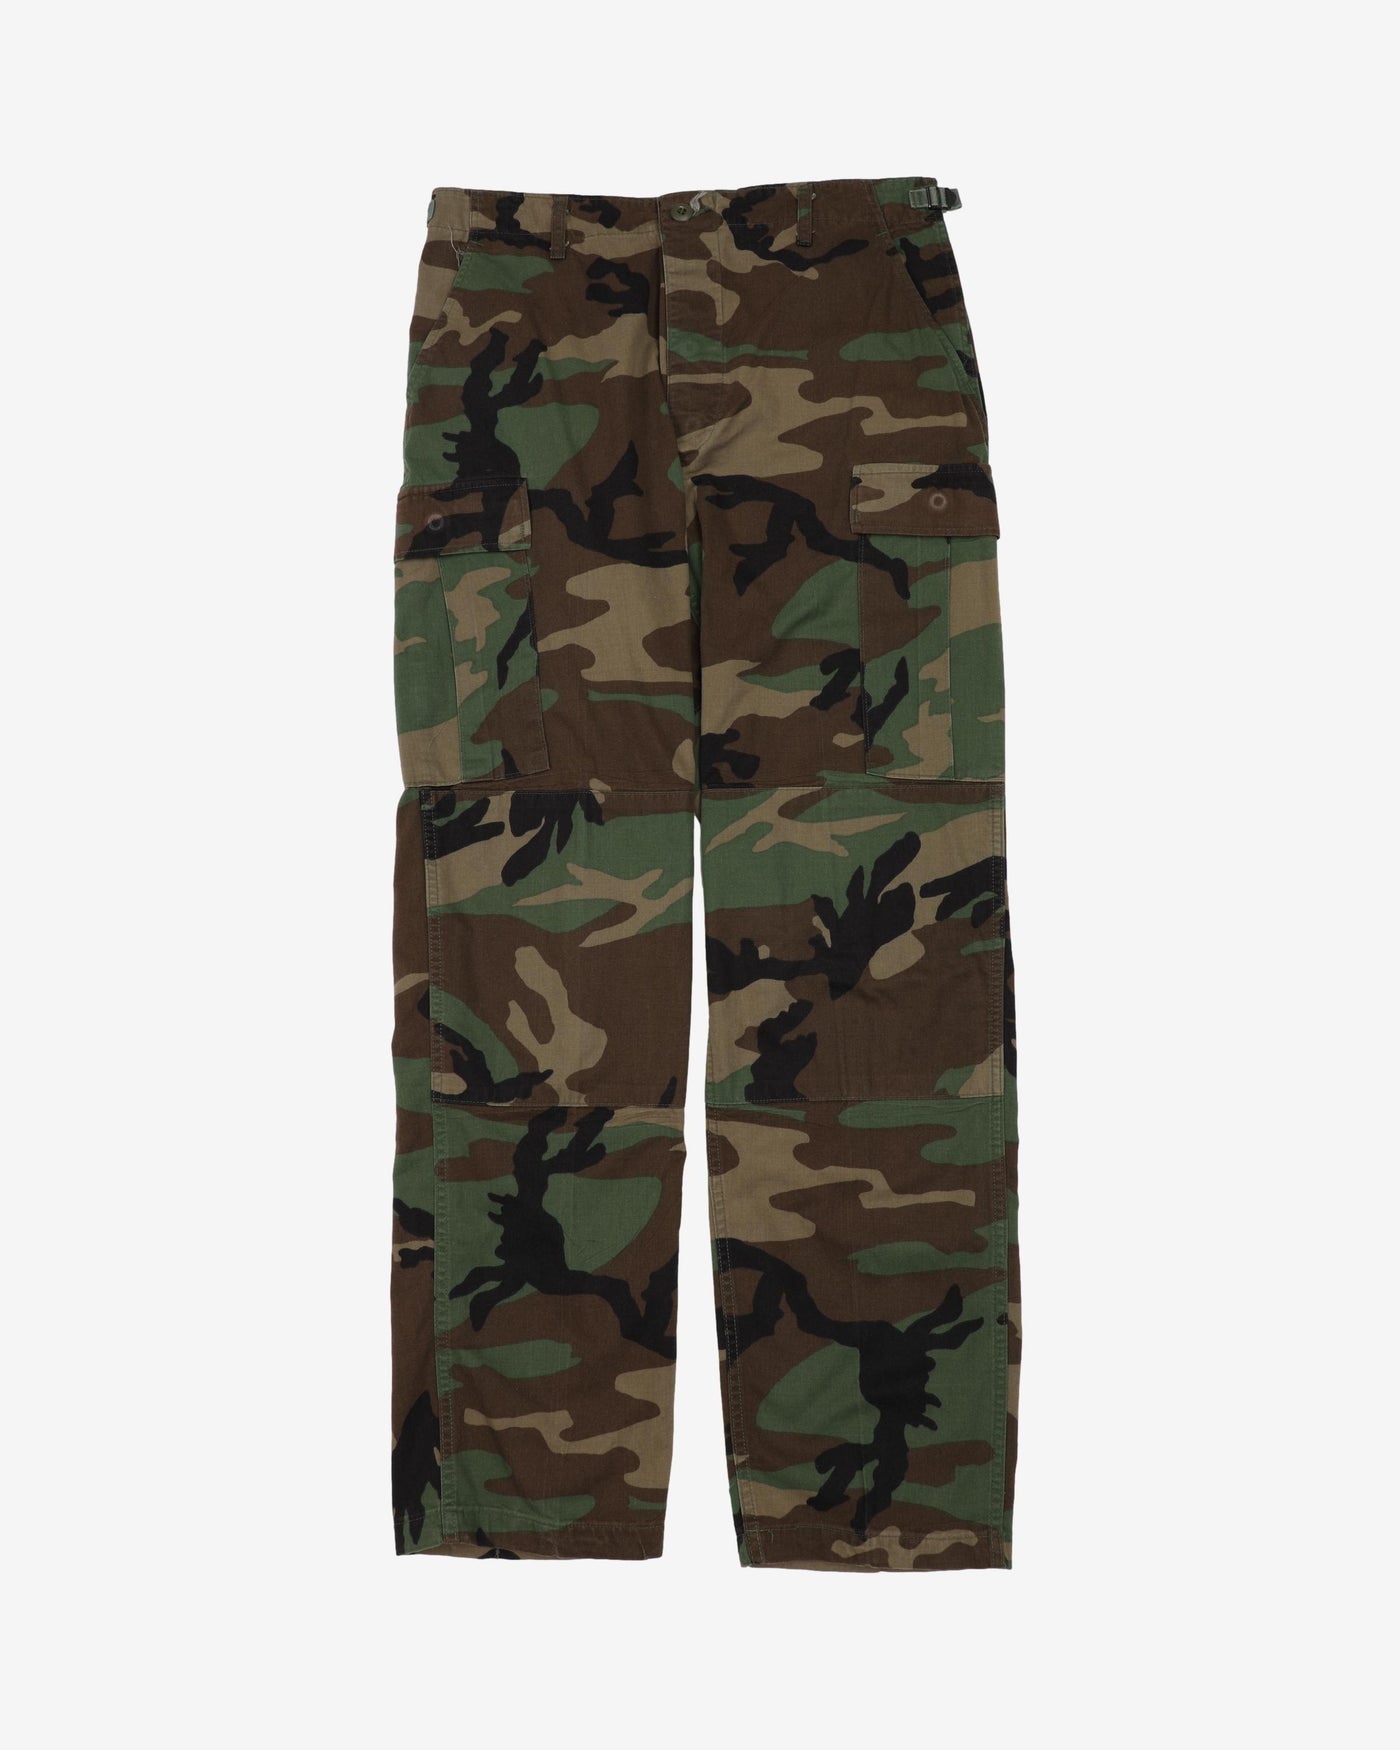 1990s Vintage US Army Woodland Camo BDU Combat Trousers - 32x34